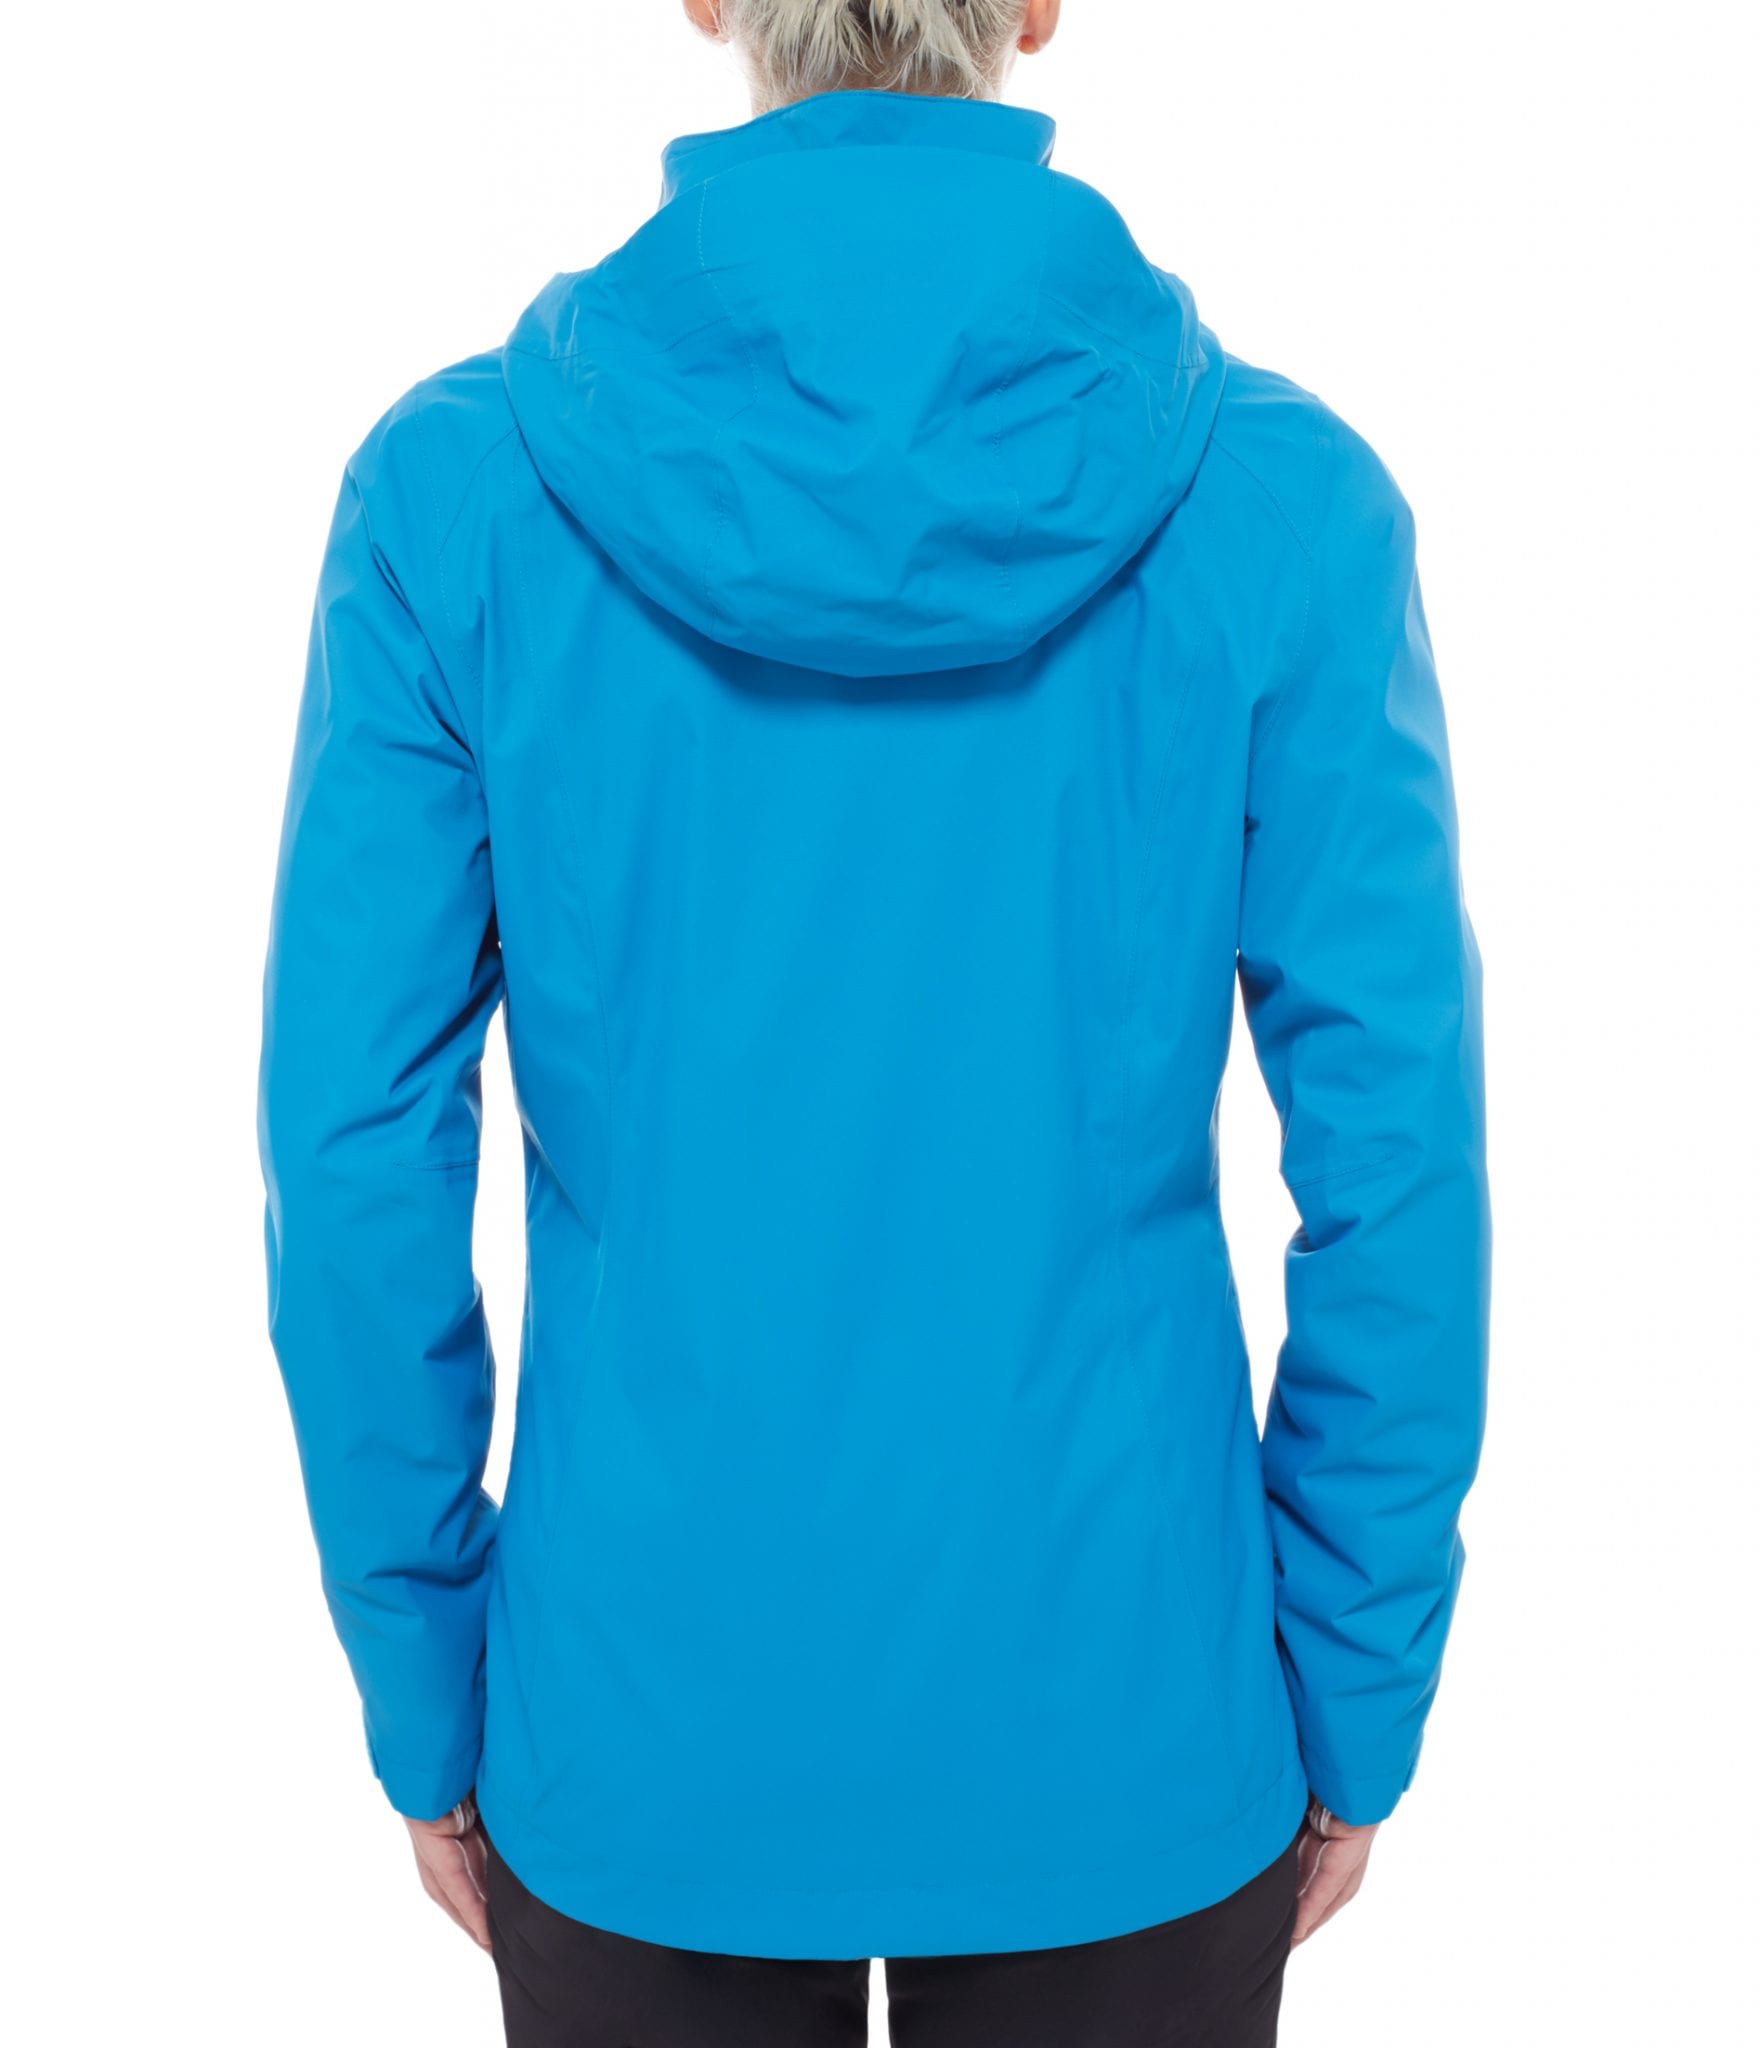 The North Face : W Evolve II triclimate jacket – Danish blue | o-zone shop